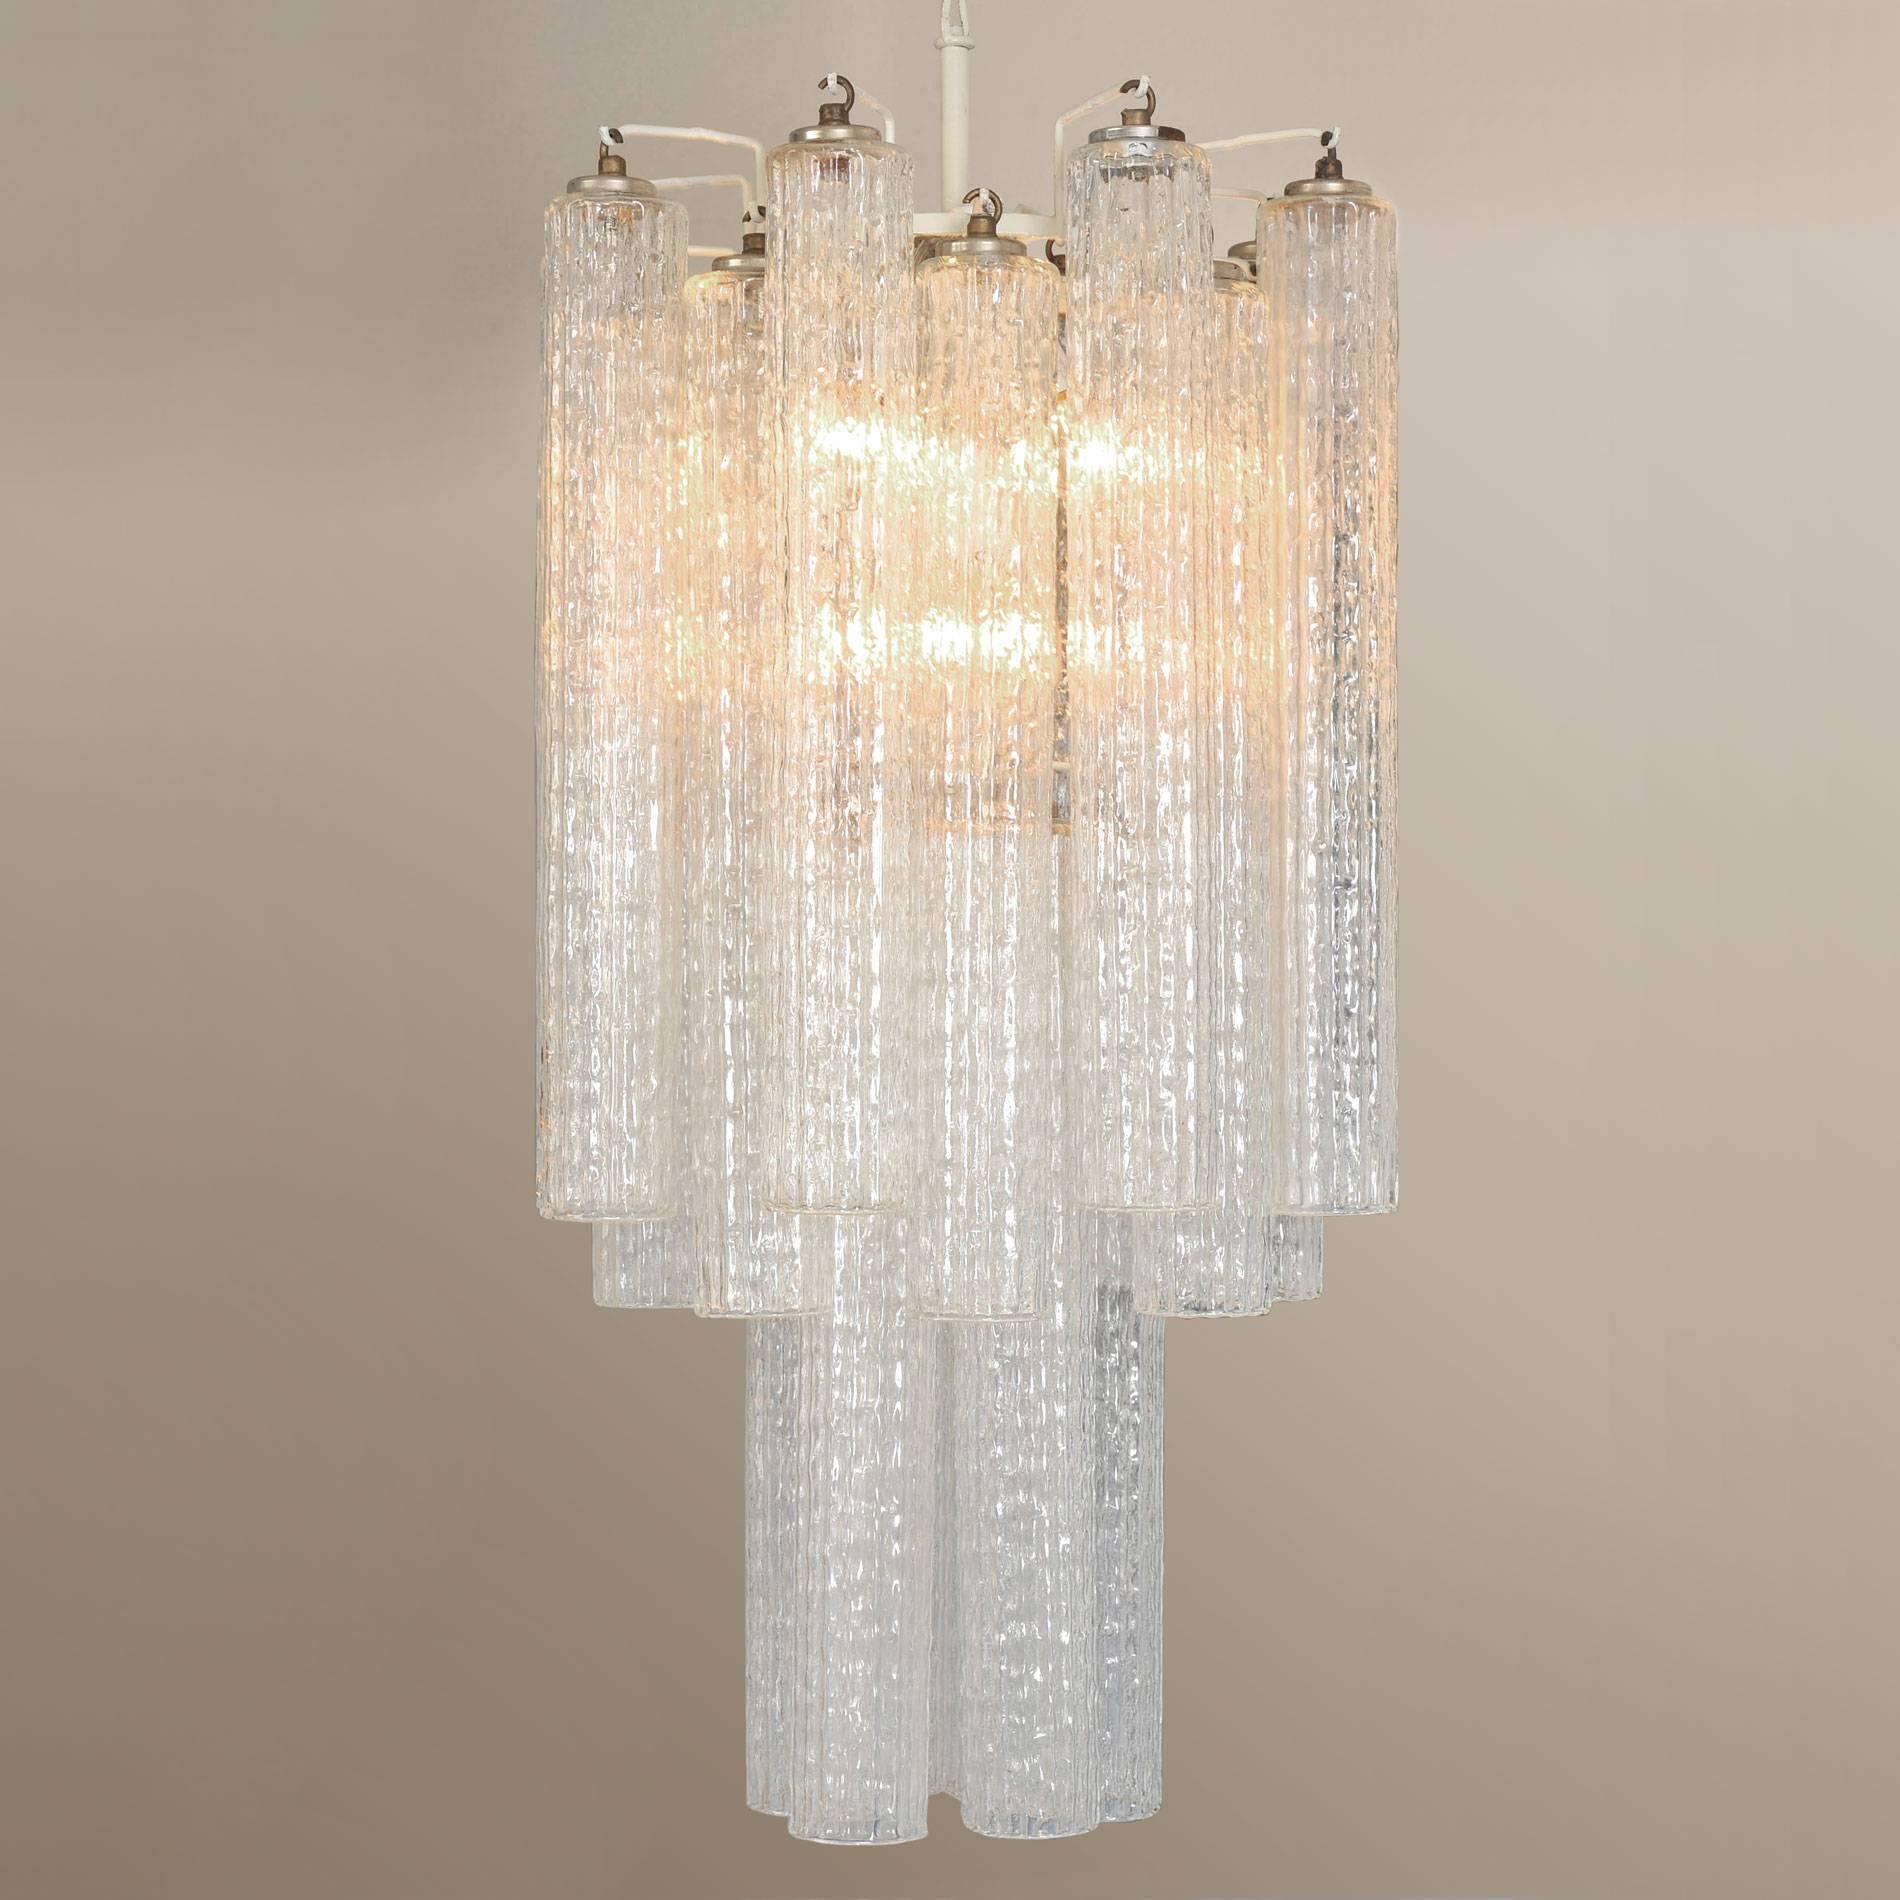 Superb Murano glass chandelier in two tiers of unusually long textured cylindrical drops.

Venini glass was founded in 1921 on the island of Murano by Paolo Venini. Over the century the manufacturers were responsible for some of the most